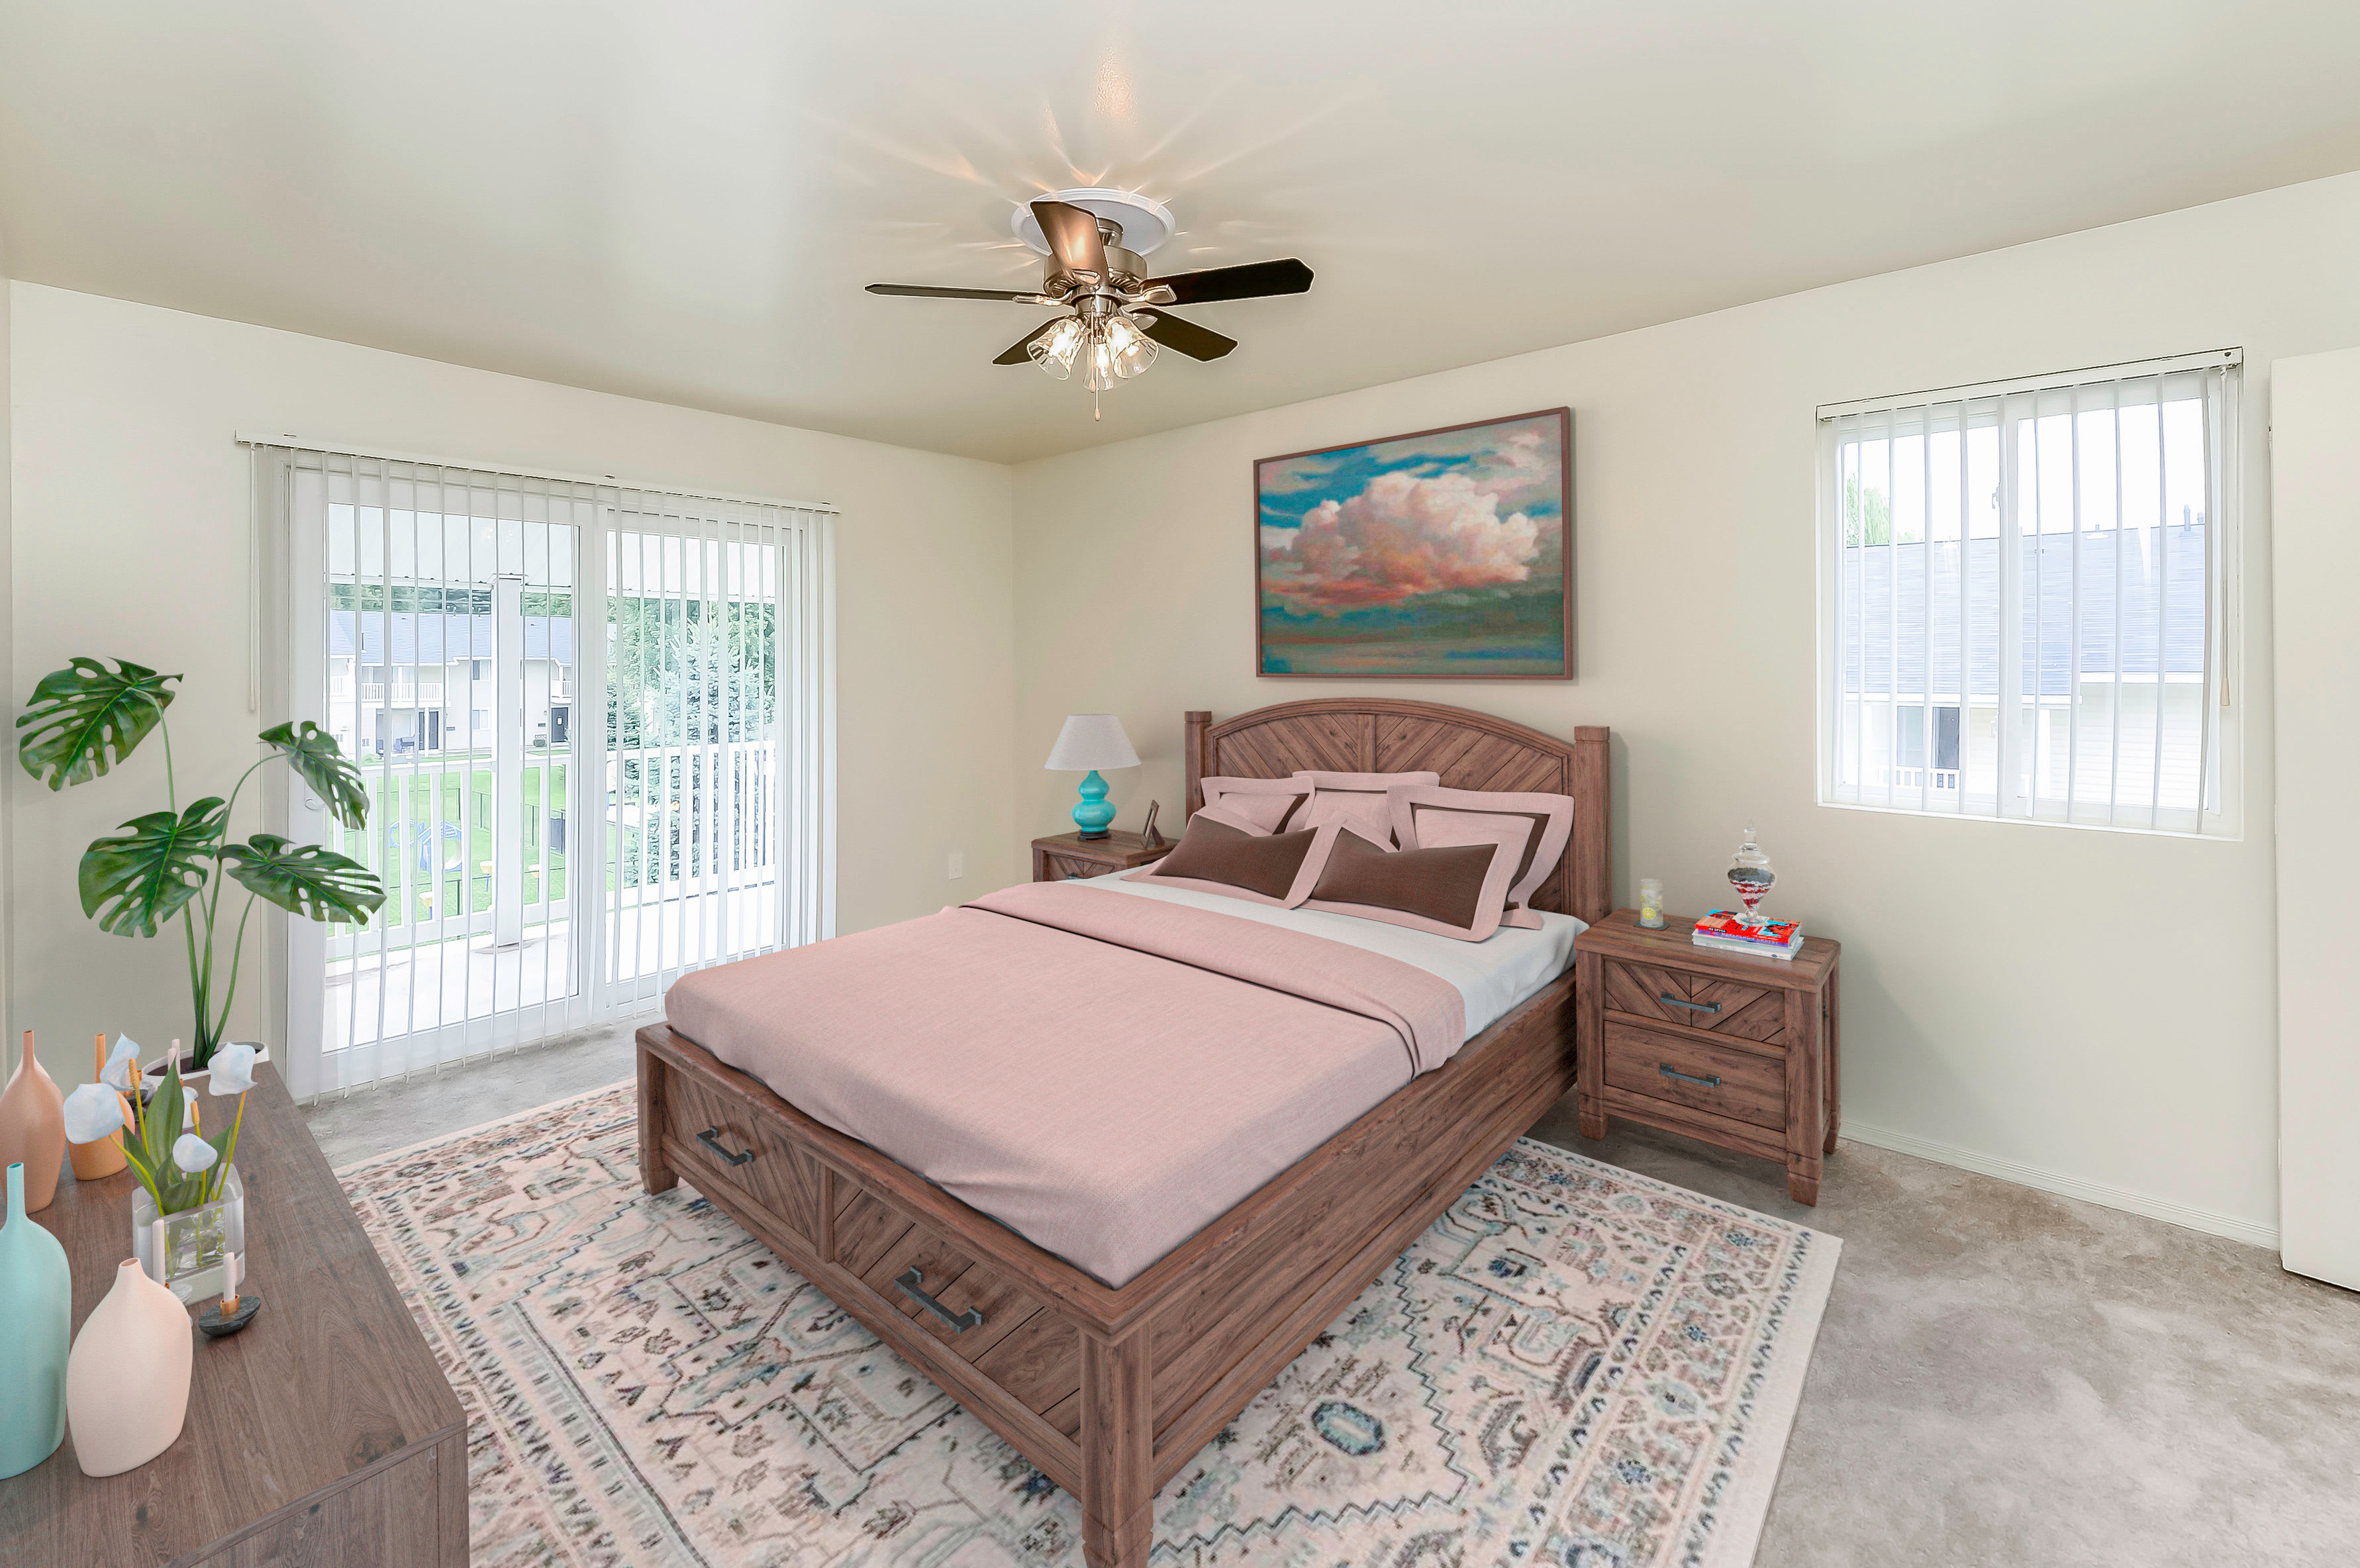 Model bedroom with a ceiling fan at Greentree Village Townhomes in Lebanon, Pennsylvania